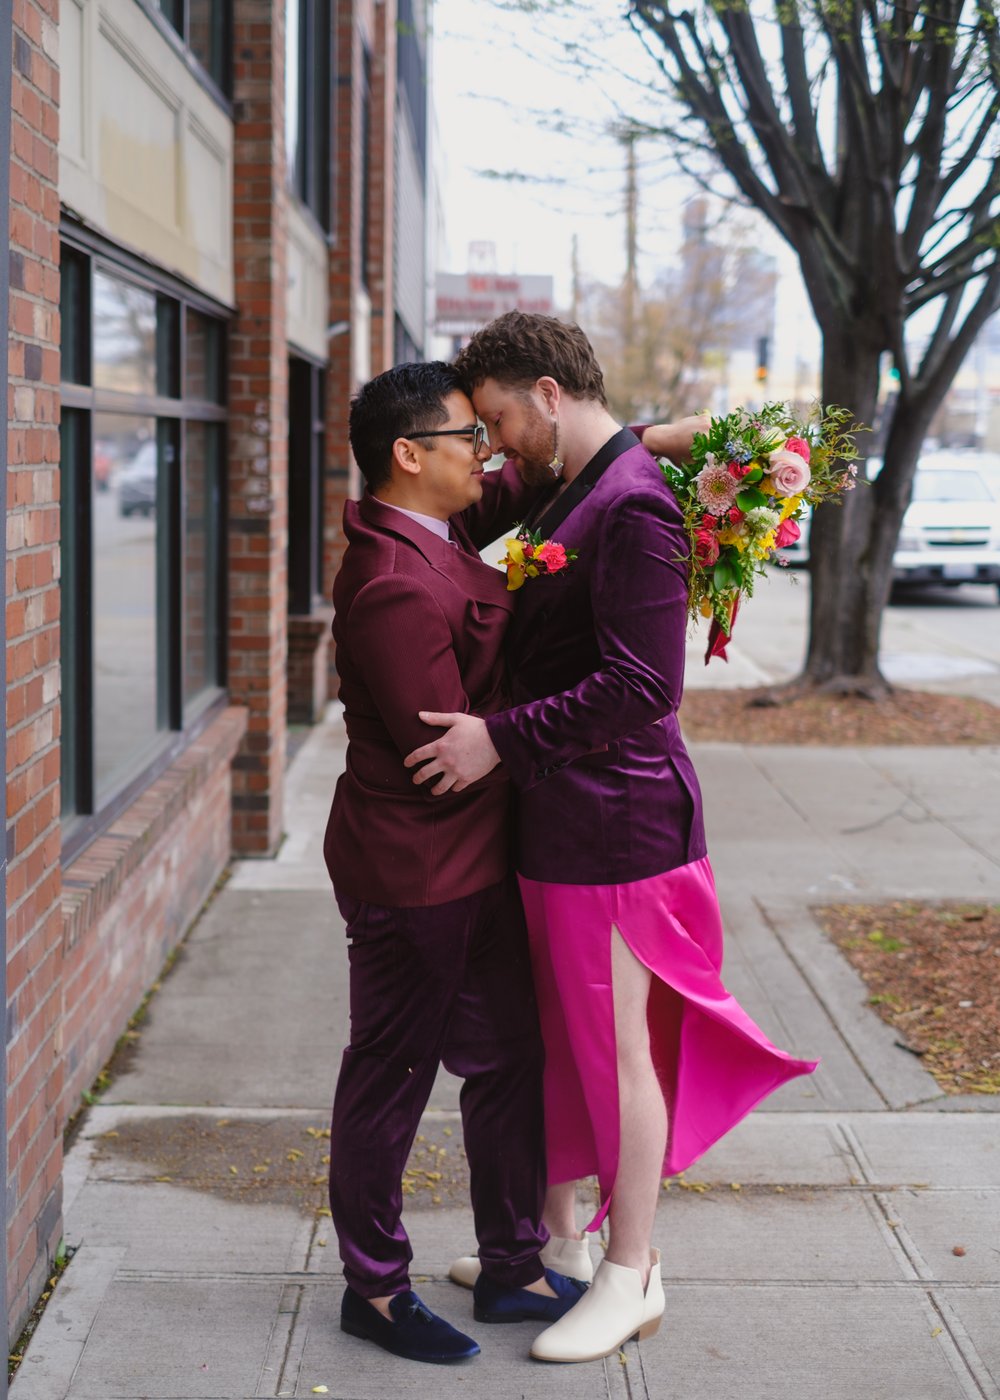  Two grooms embrace on the sidewalk in front of a brick building. One is wearing a pink skirt that is gently billowing behind them in the wind. 